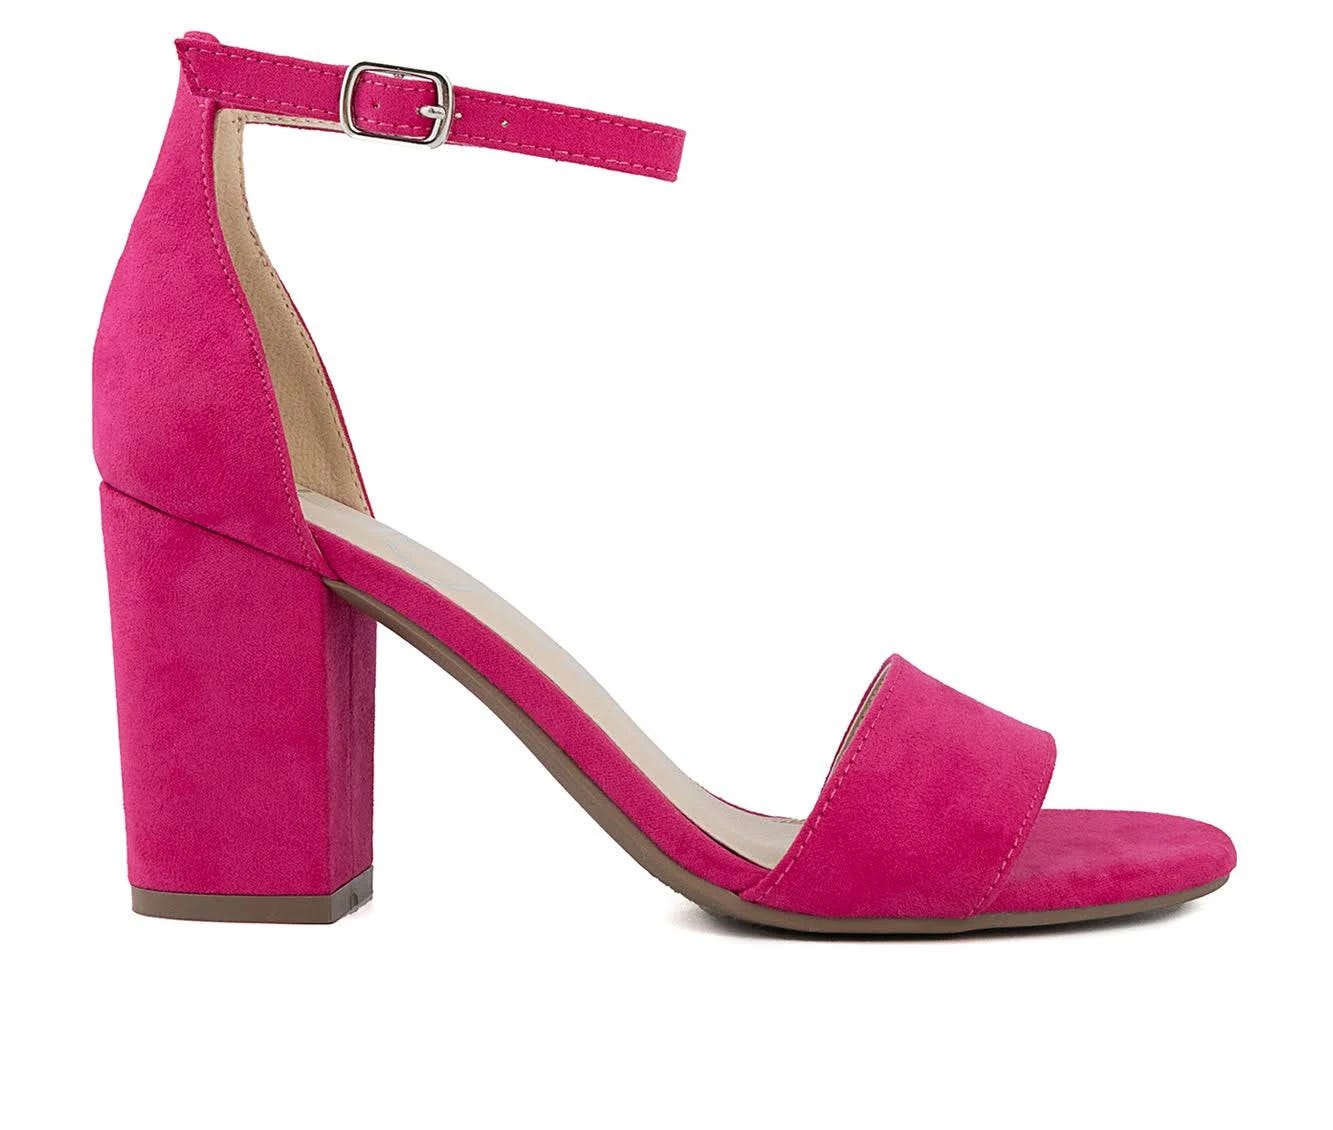 Pink High Heel Dress Shoes for Women | Image